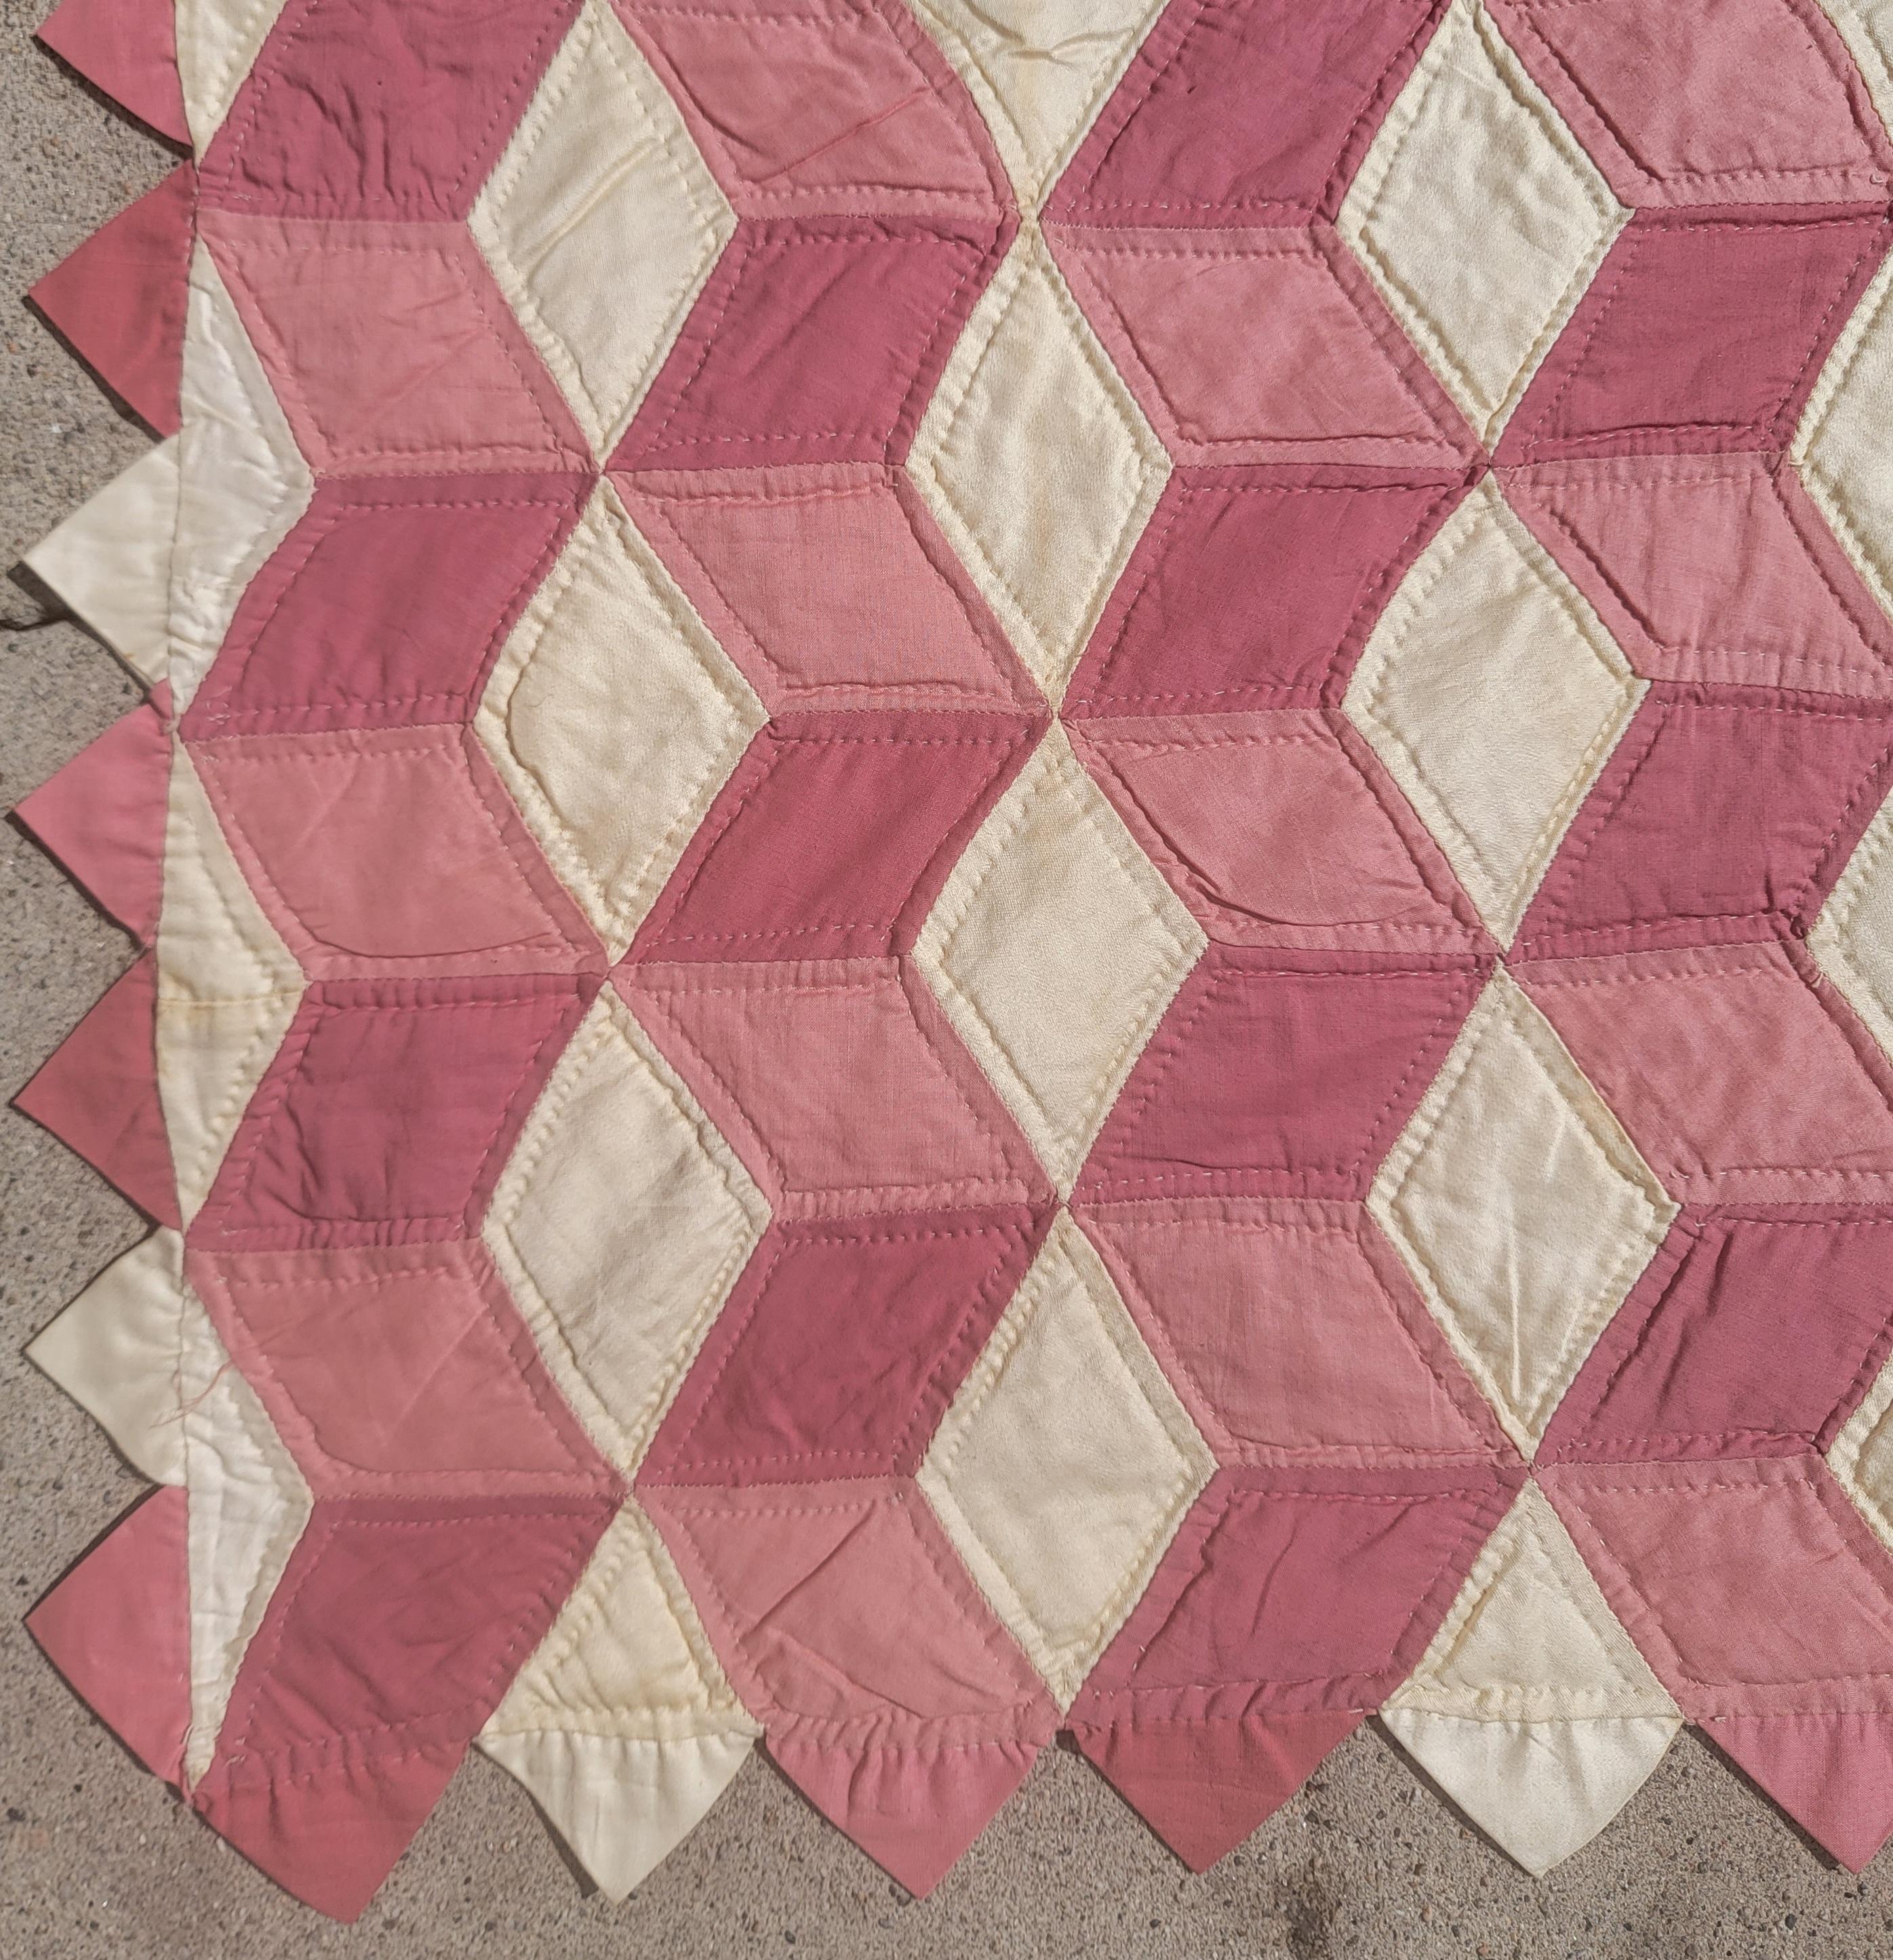 Beautiful 19th C Tumbling blocks pink and white polished cotton Quilt. 
Great condition! This fine polished cotton quilt has very nice piecing and quilting.